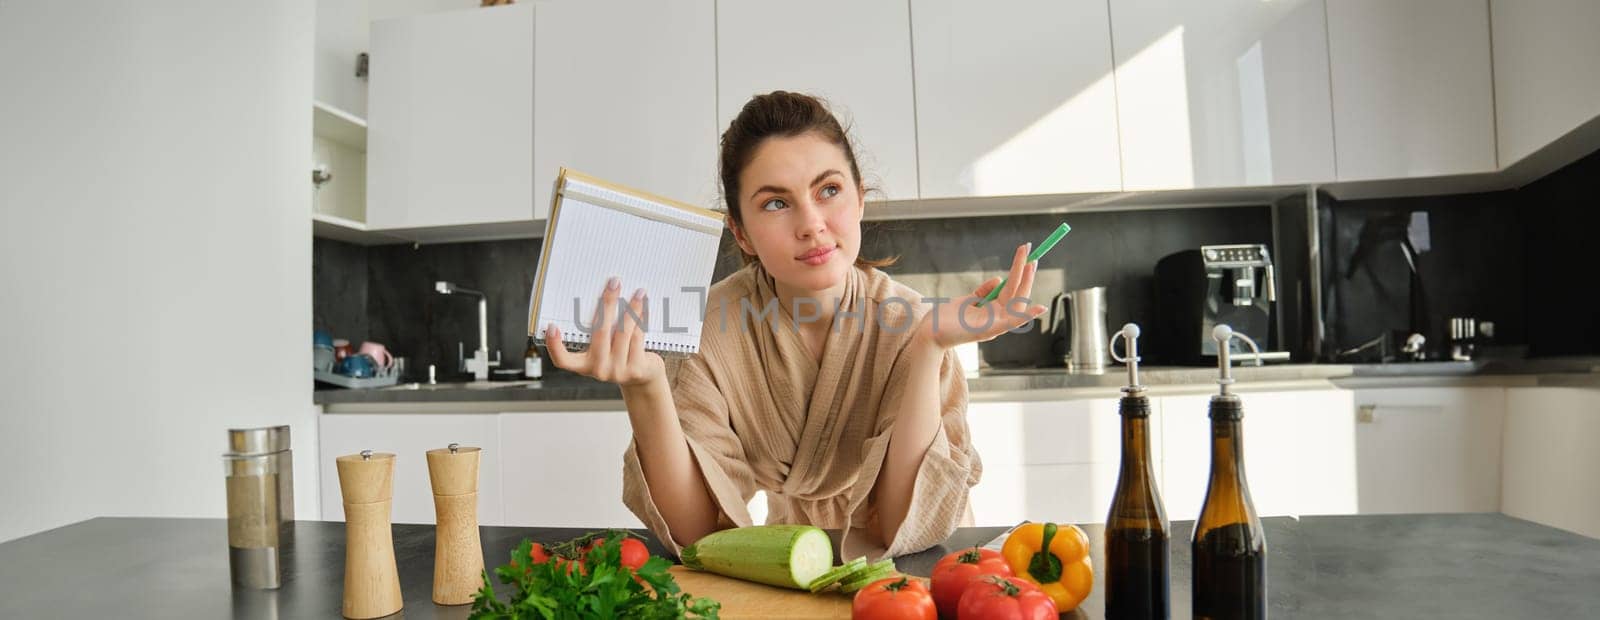 Portrait of woman checking grocery list, looking at vegetables, holding notebook, reading recipe while cooking meal in the kitchen, chopping tomatoes and zucchini.